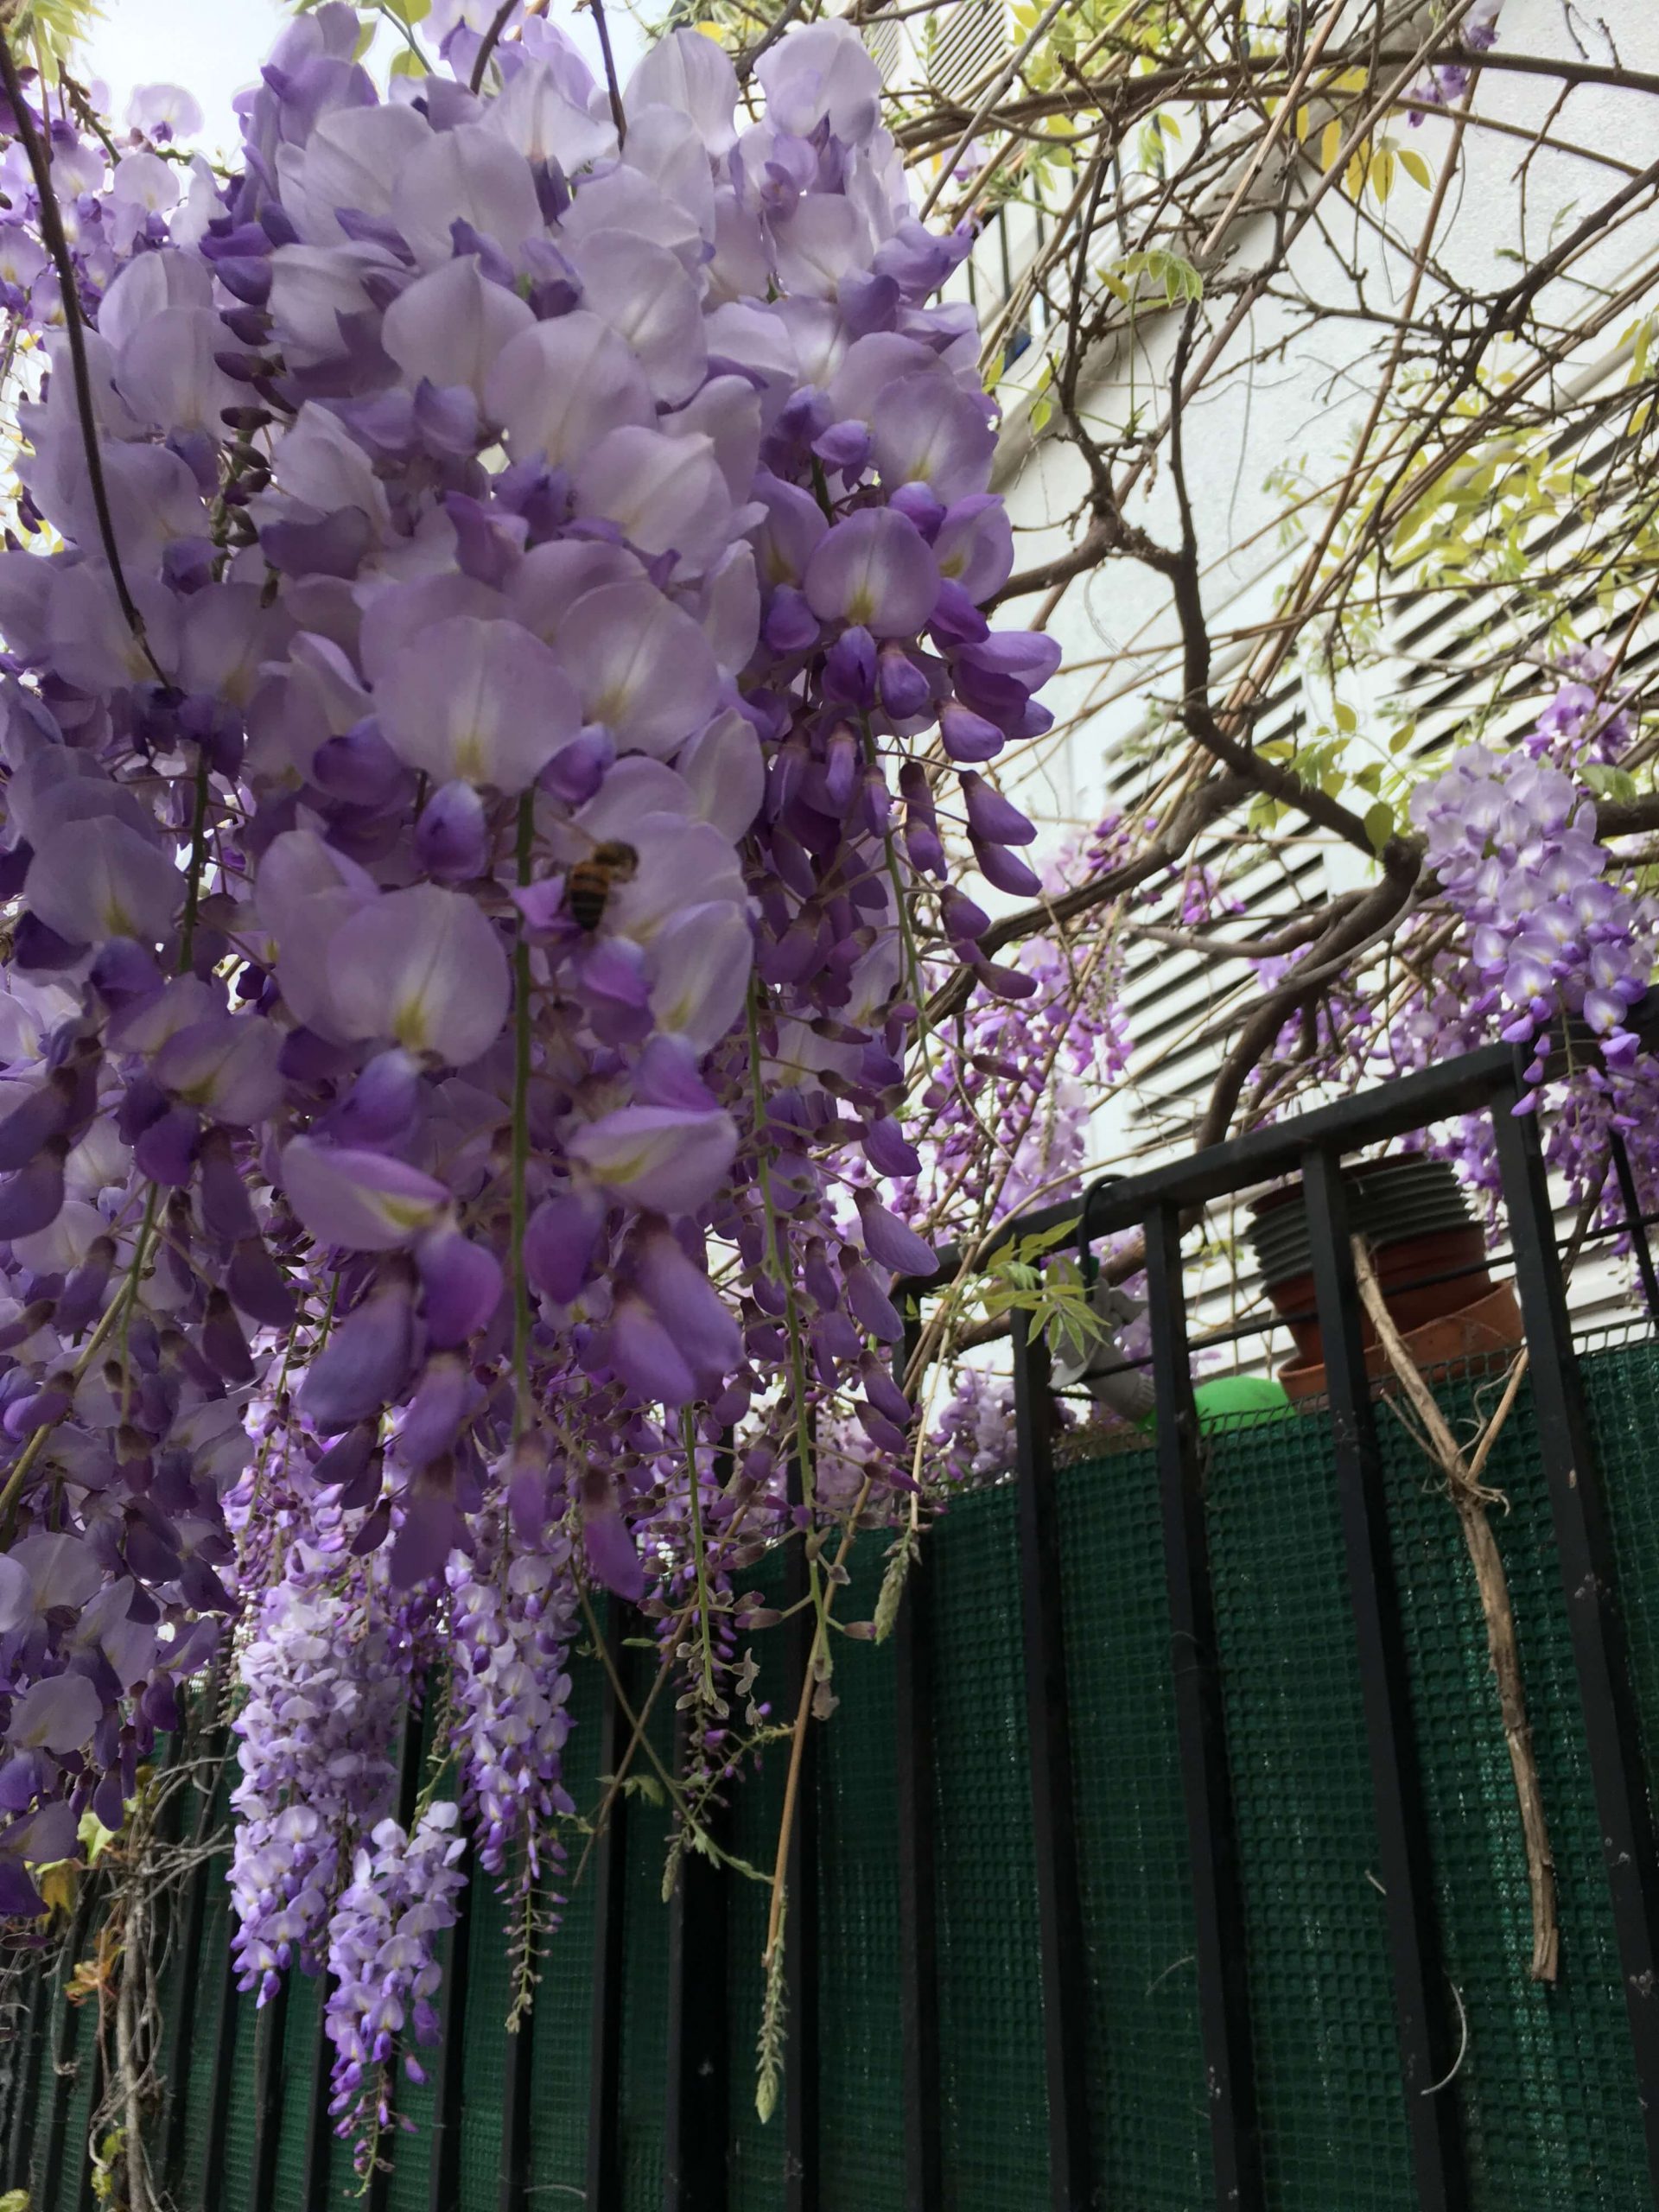 Blooming purple wisteria hanging in front of a fence in Montmartre in Paris